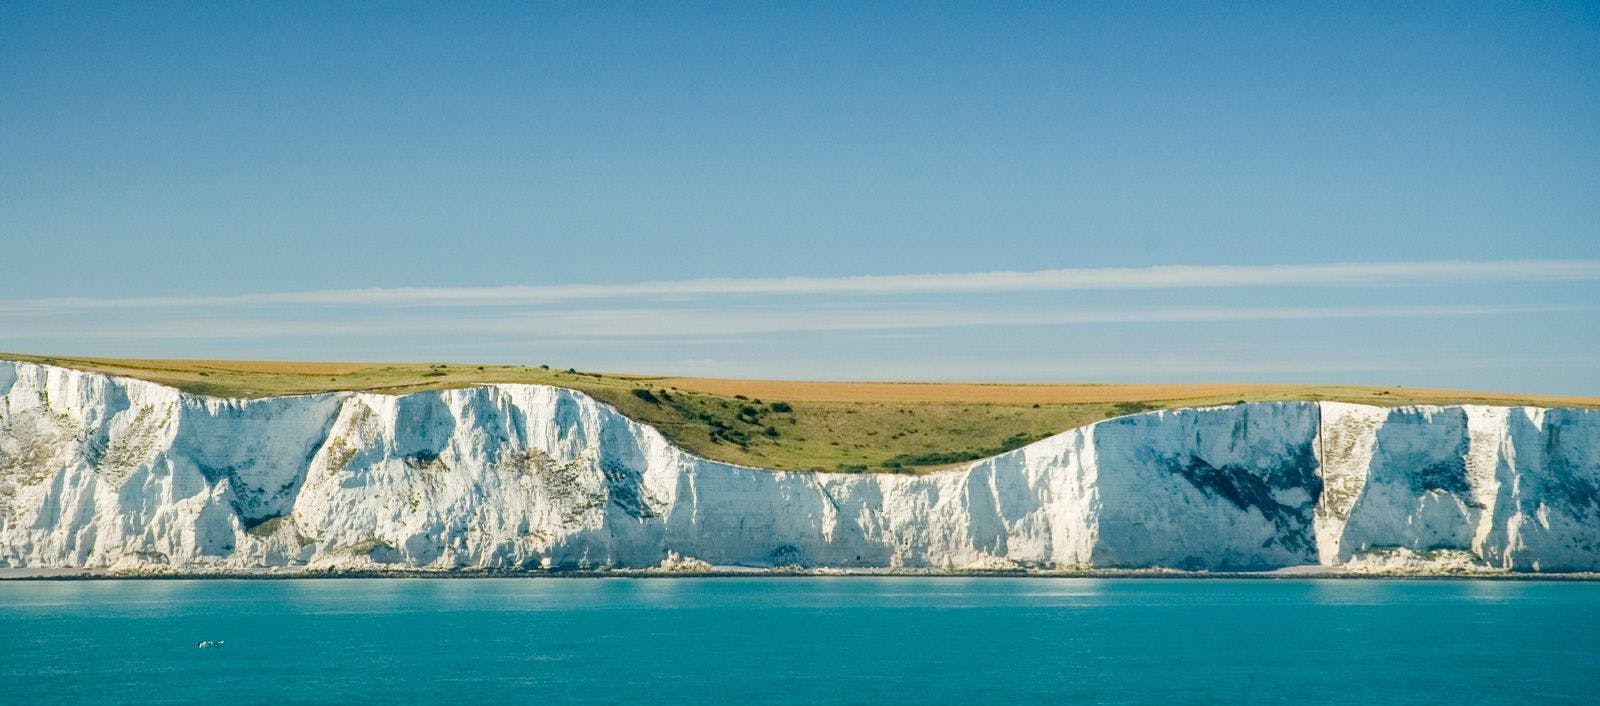 White cliffs of Dover, a line of tall chalk cliffs with calm blue sea